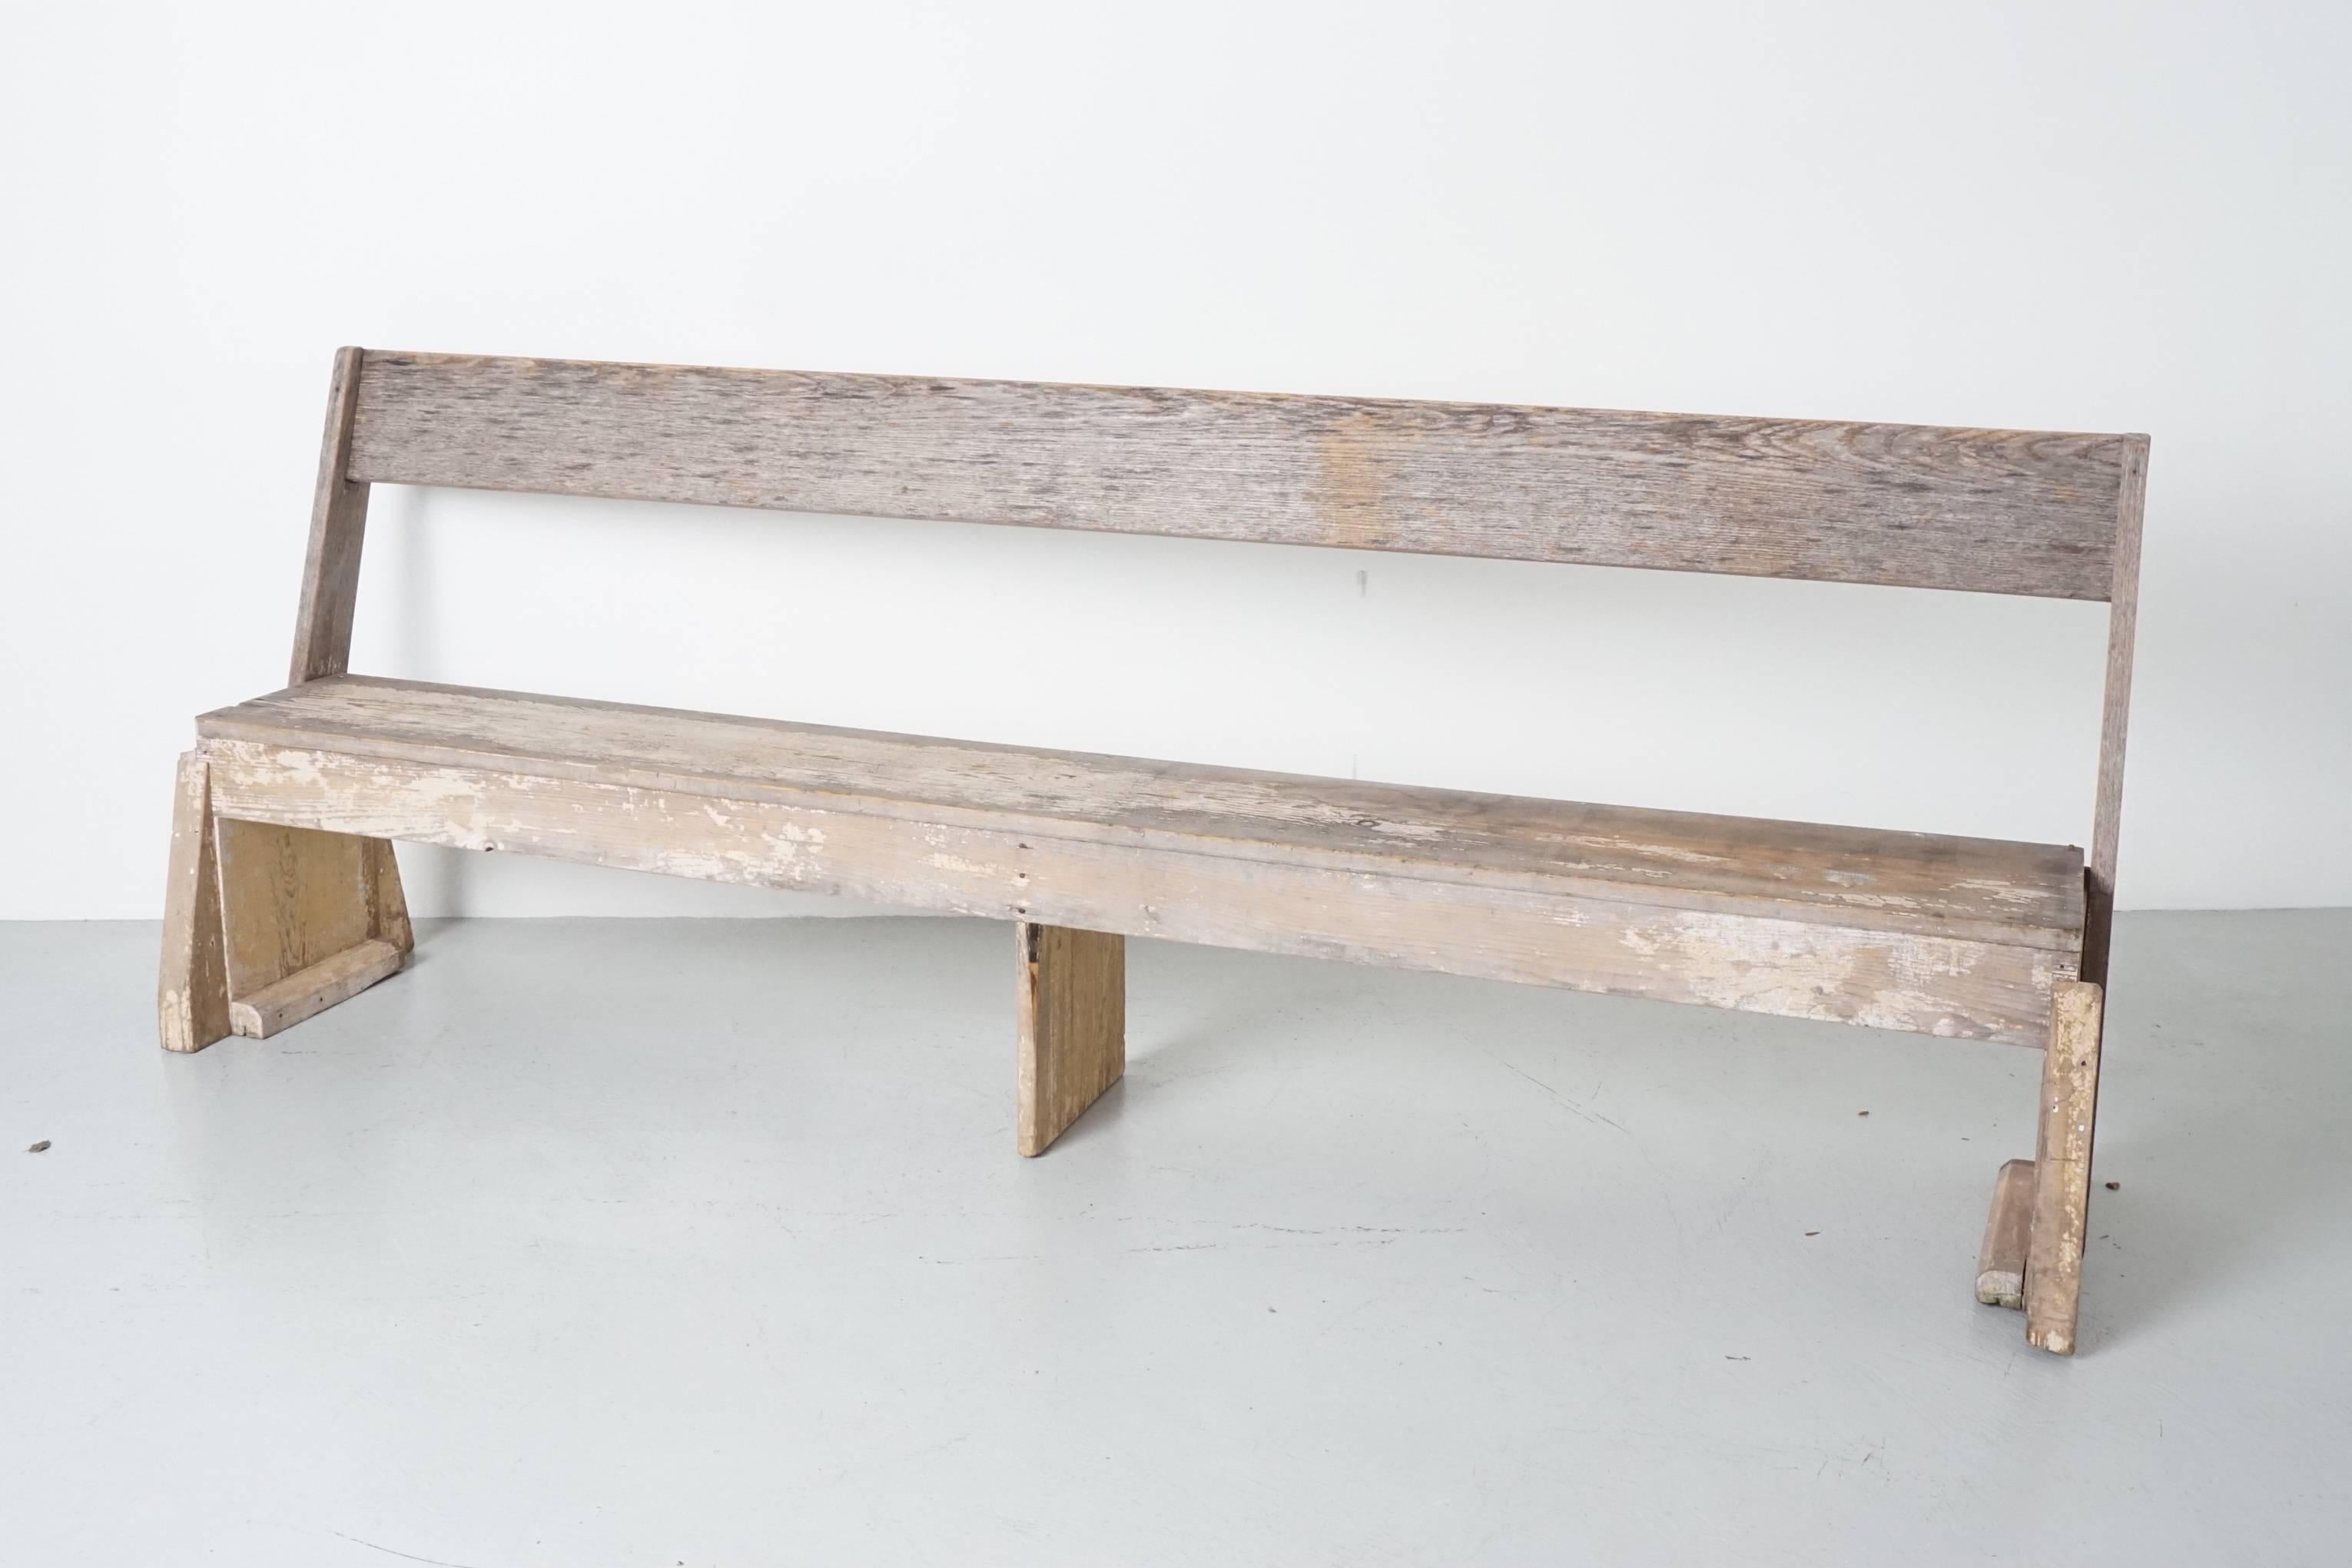 Antique bench salvaged from an old New England fire house station.
Back of bench flips to switch sides (like a railroad bench), most likely the bench was located in the middle of the station where firemen could rotate it according to which engine